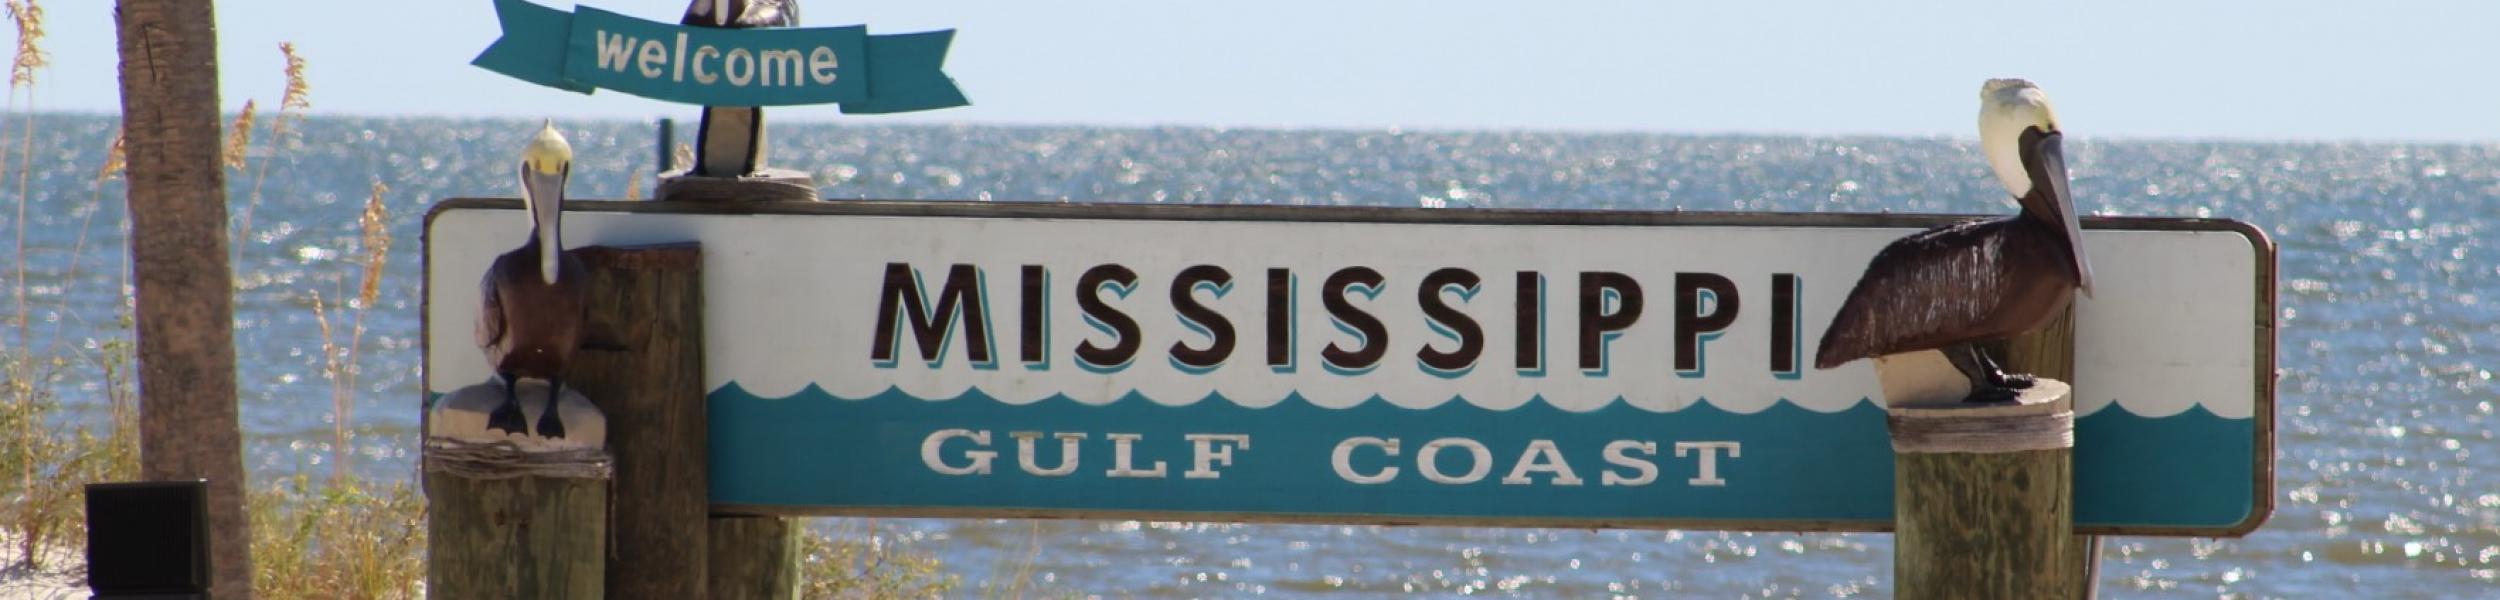 image of a Mississippi Gulf Coast sign on a beach